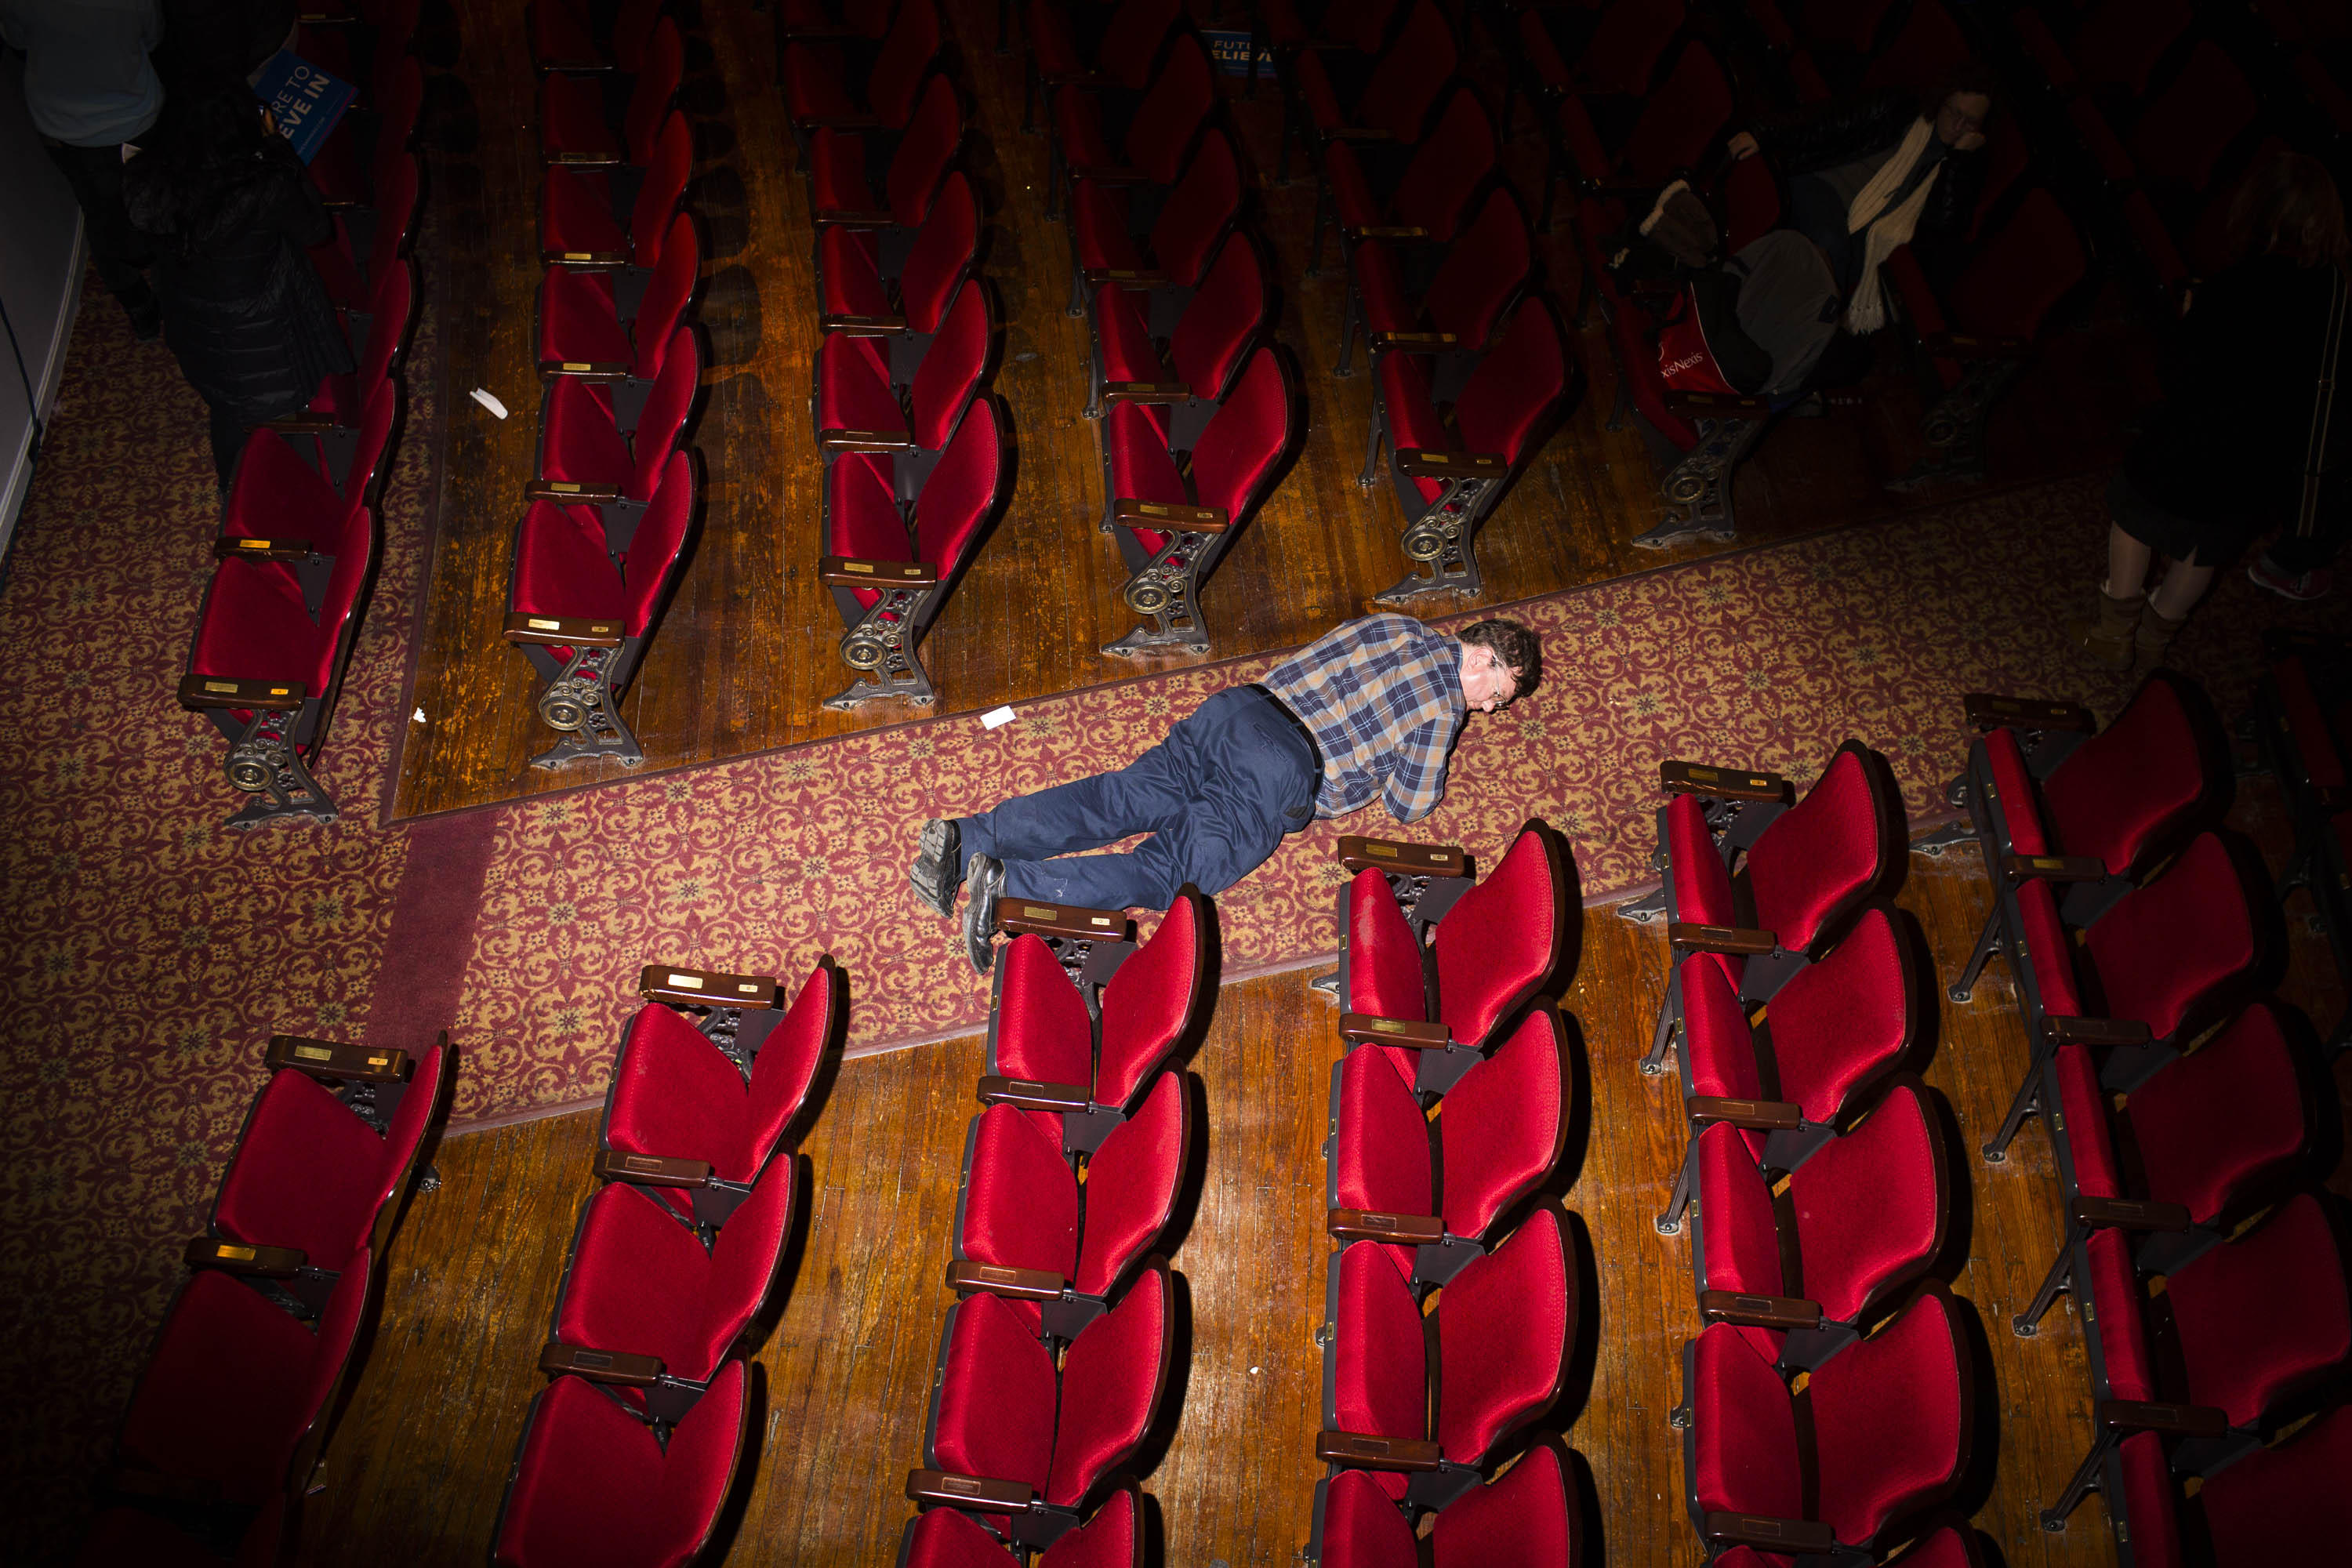 A man looks for something he dropped at the Palace Theater, where Democratic presidential candidate, Vermont Sen. Bernie Sanders held a campaign event on  Feb. 8, 2016, in Manchester, N.H.